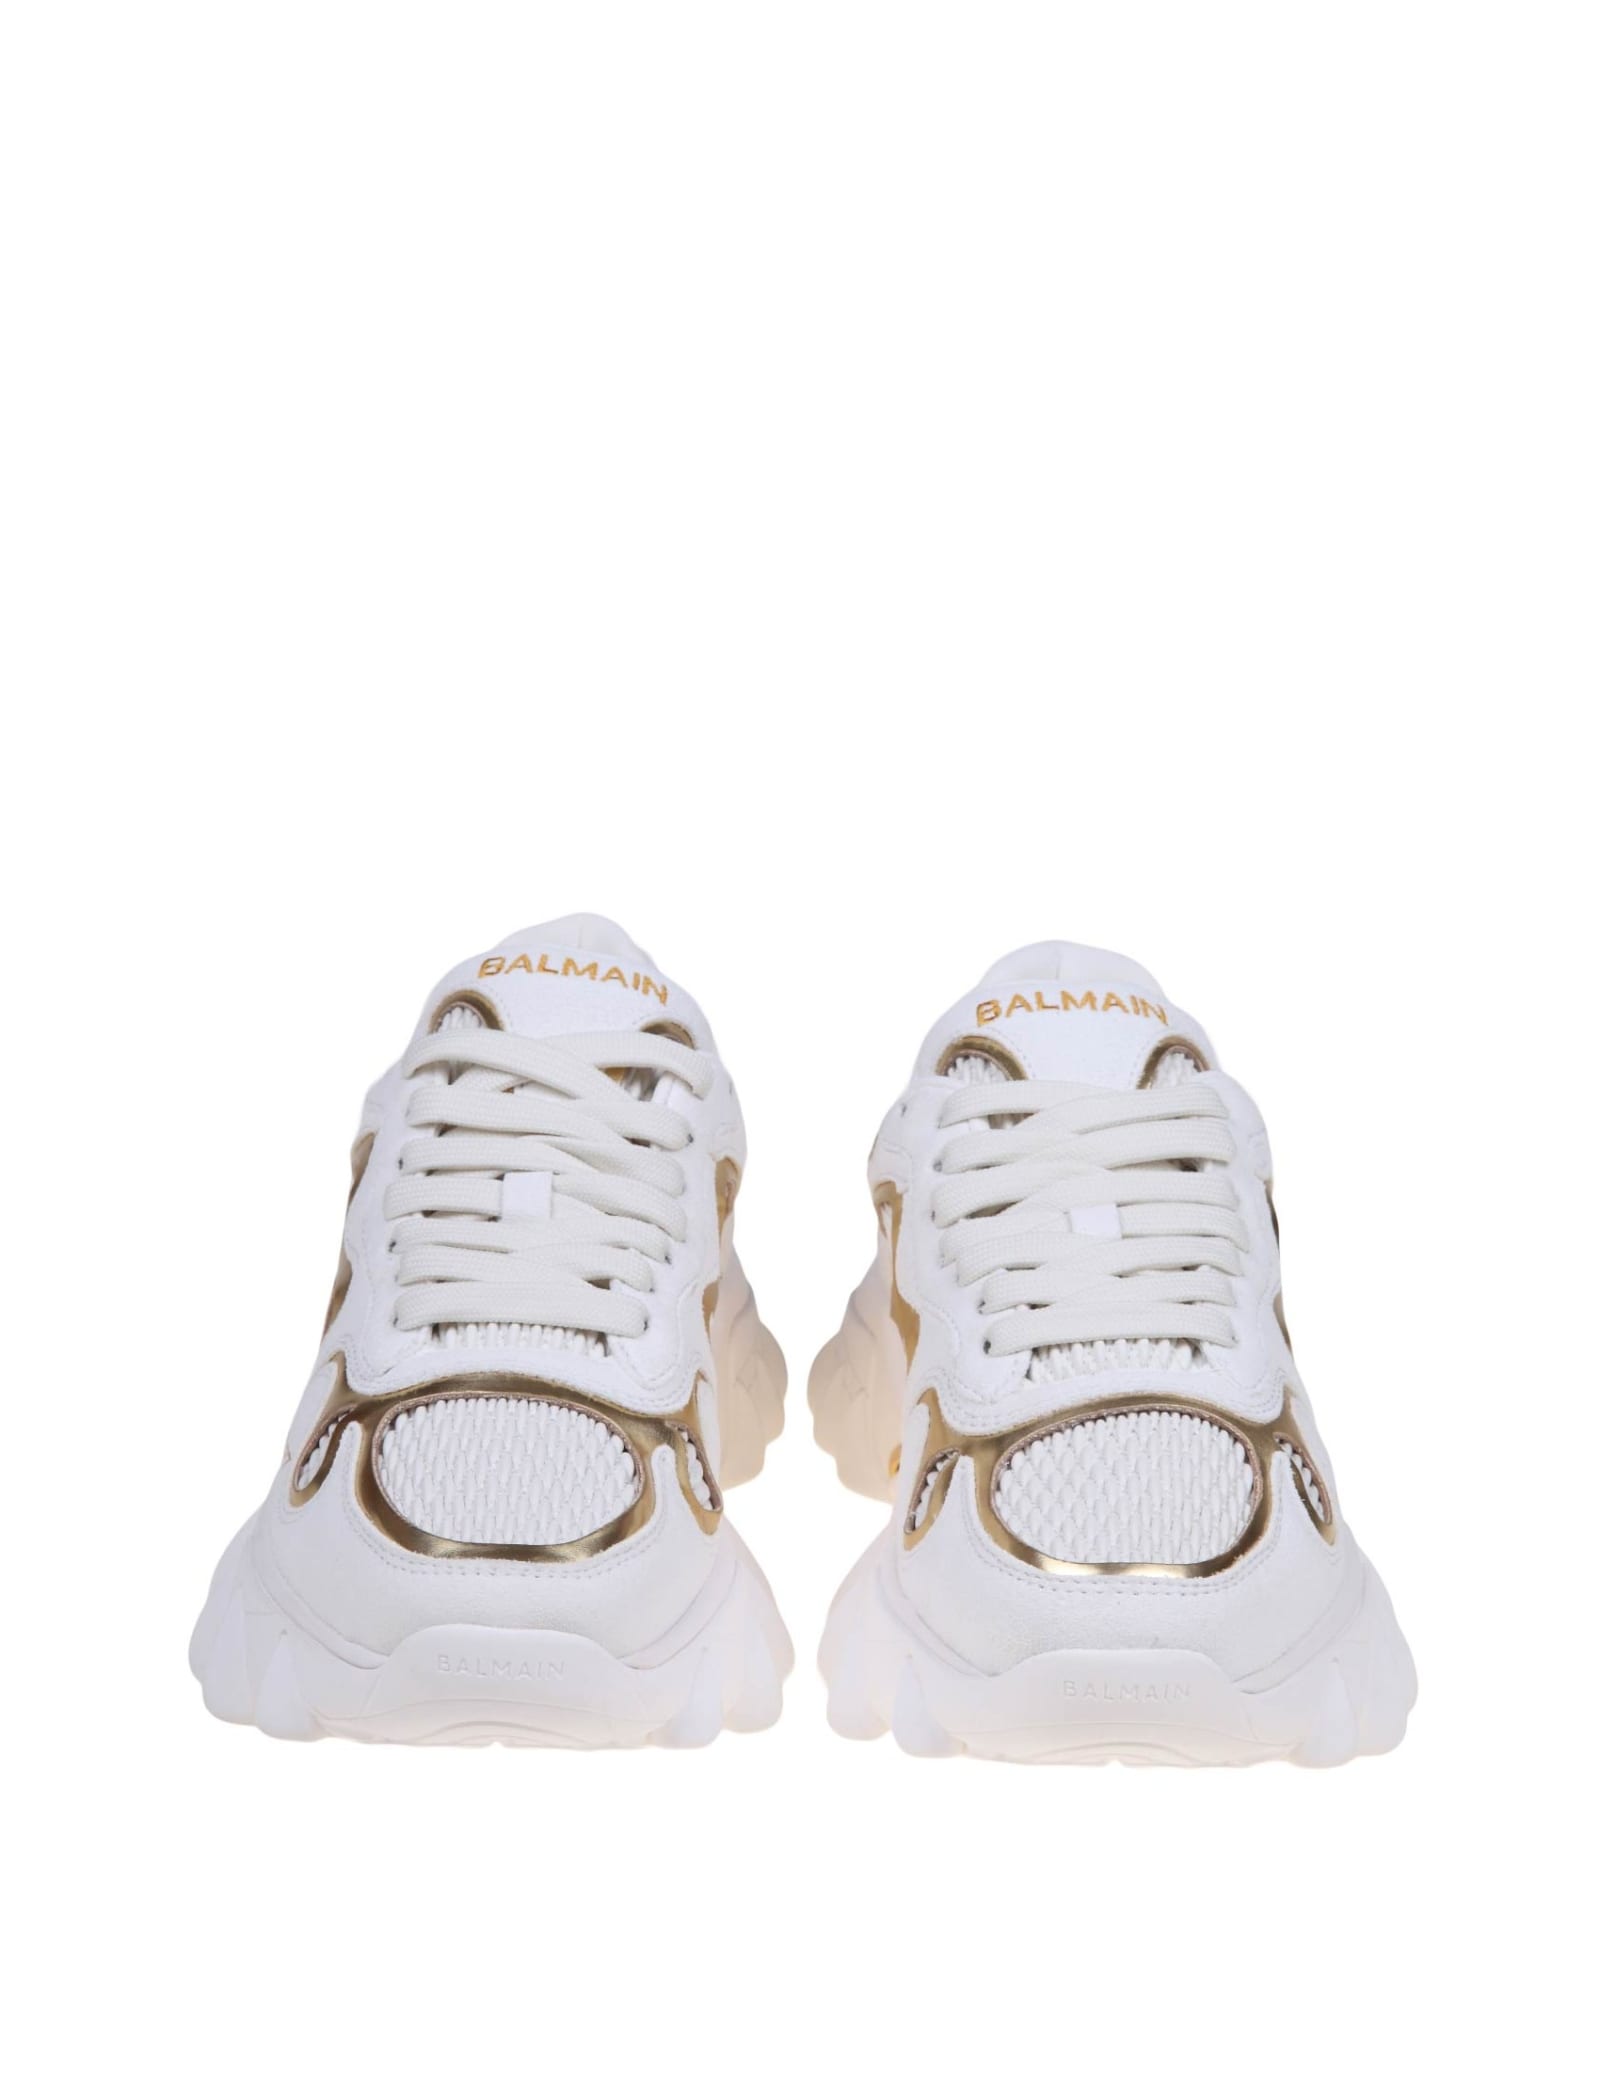 Shop Balmain B-east Sneakers In White And Gold Suede And Leather In White/gold